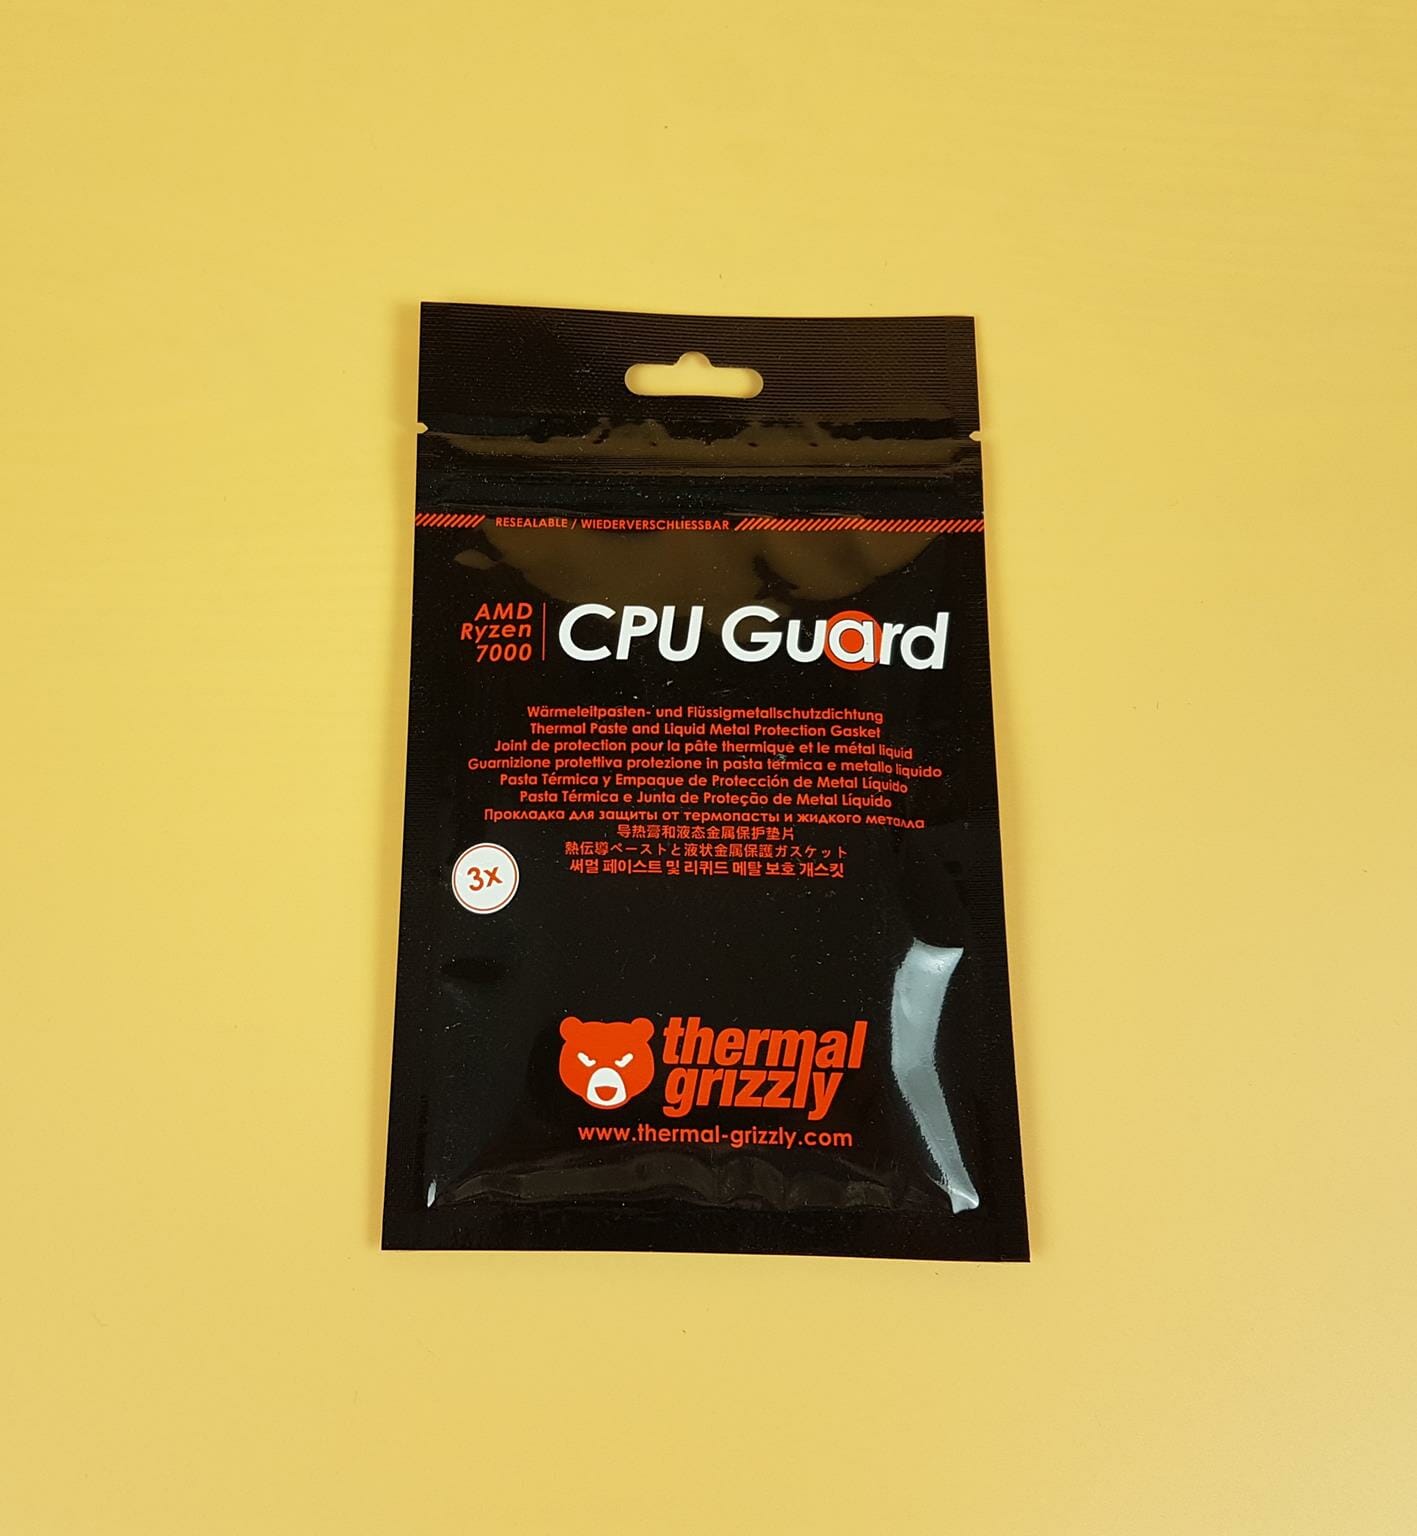 Thermal Grizzly CPU Guard Packing Box 1